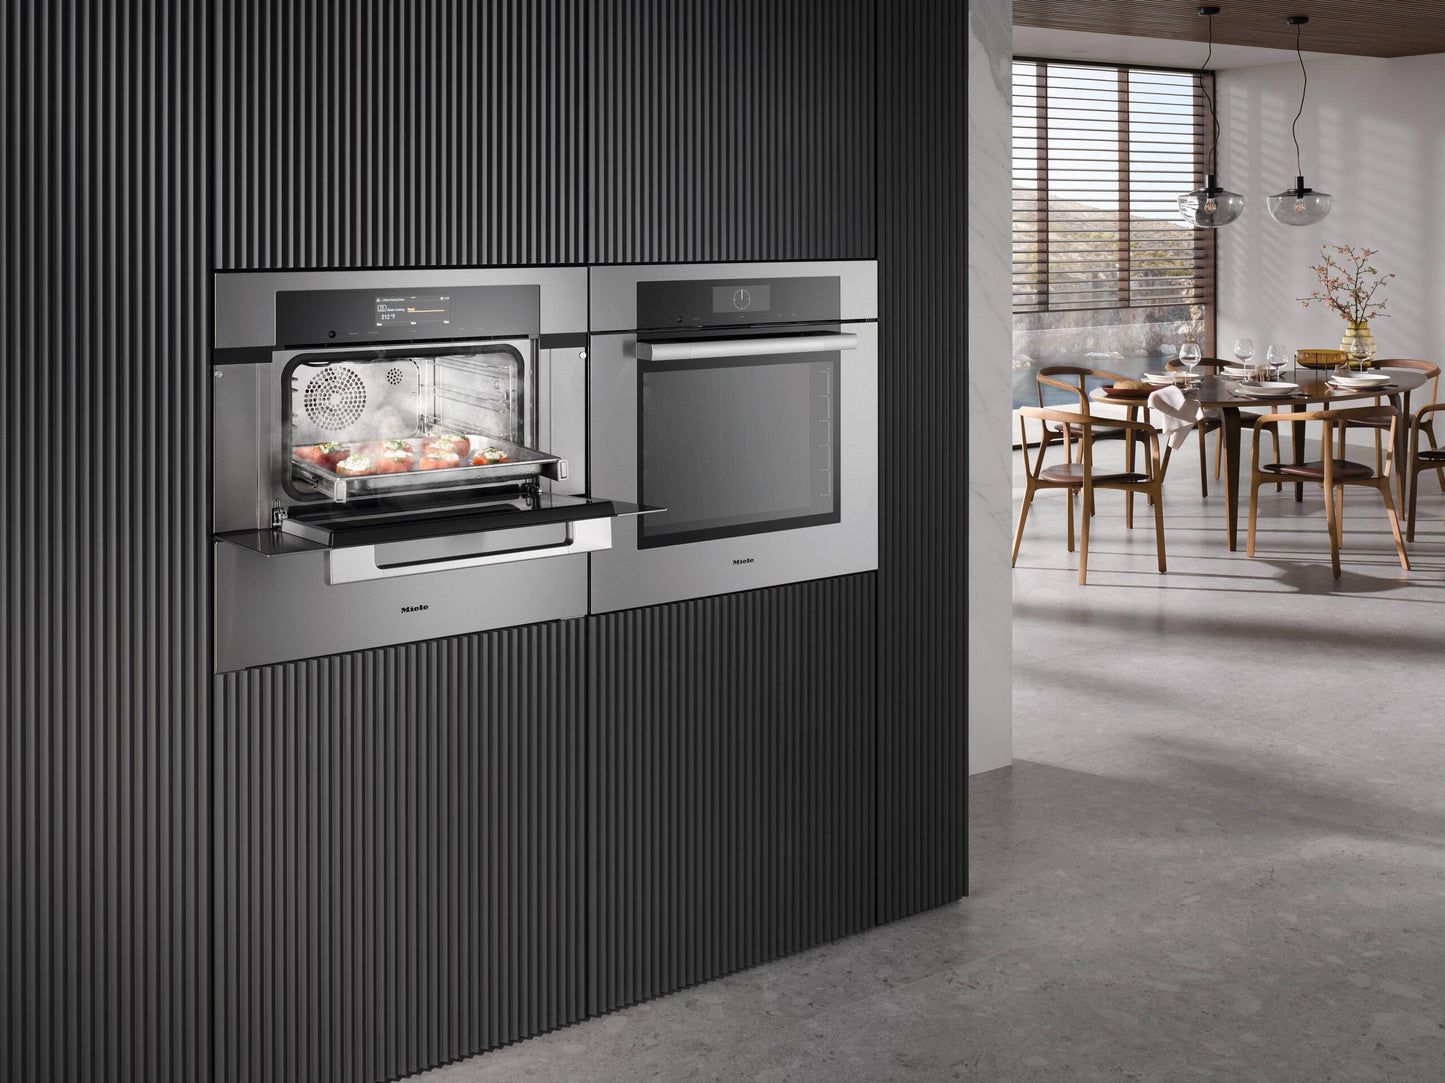 Miele DGC7770 STAINLESS STEEL  30" Compact Combi-Steam Oven Xl For Steam Cooking, Baking, Roasting With Roast Probe + Menu Cooking.